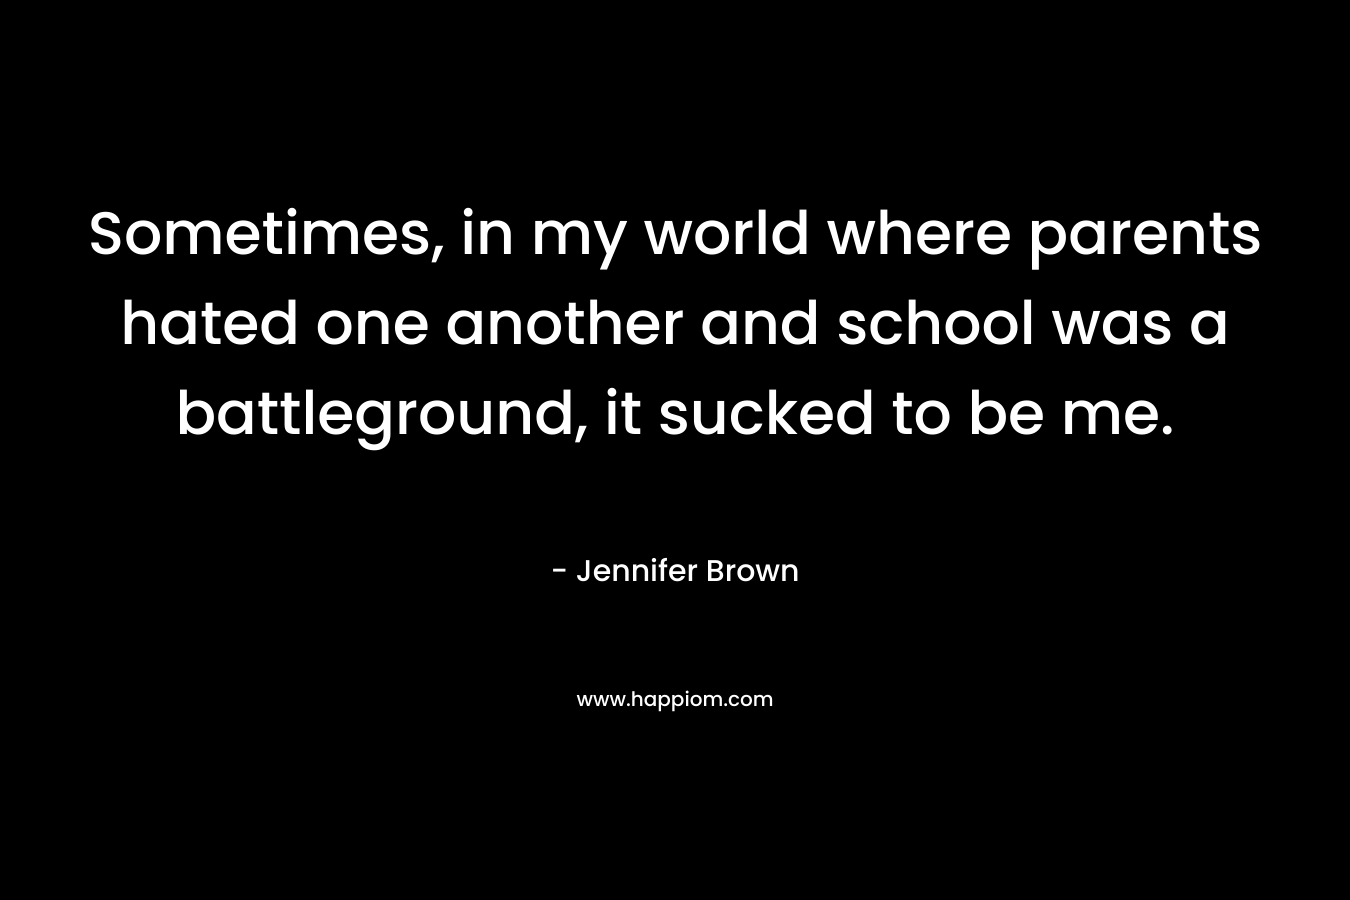 Sometimes, in my world where parents hated one another and school was a battleground, it sucked to be me. – Jennifer Brown